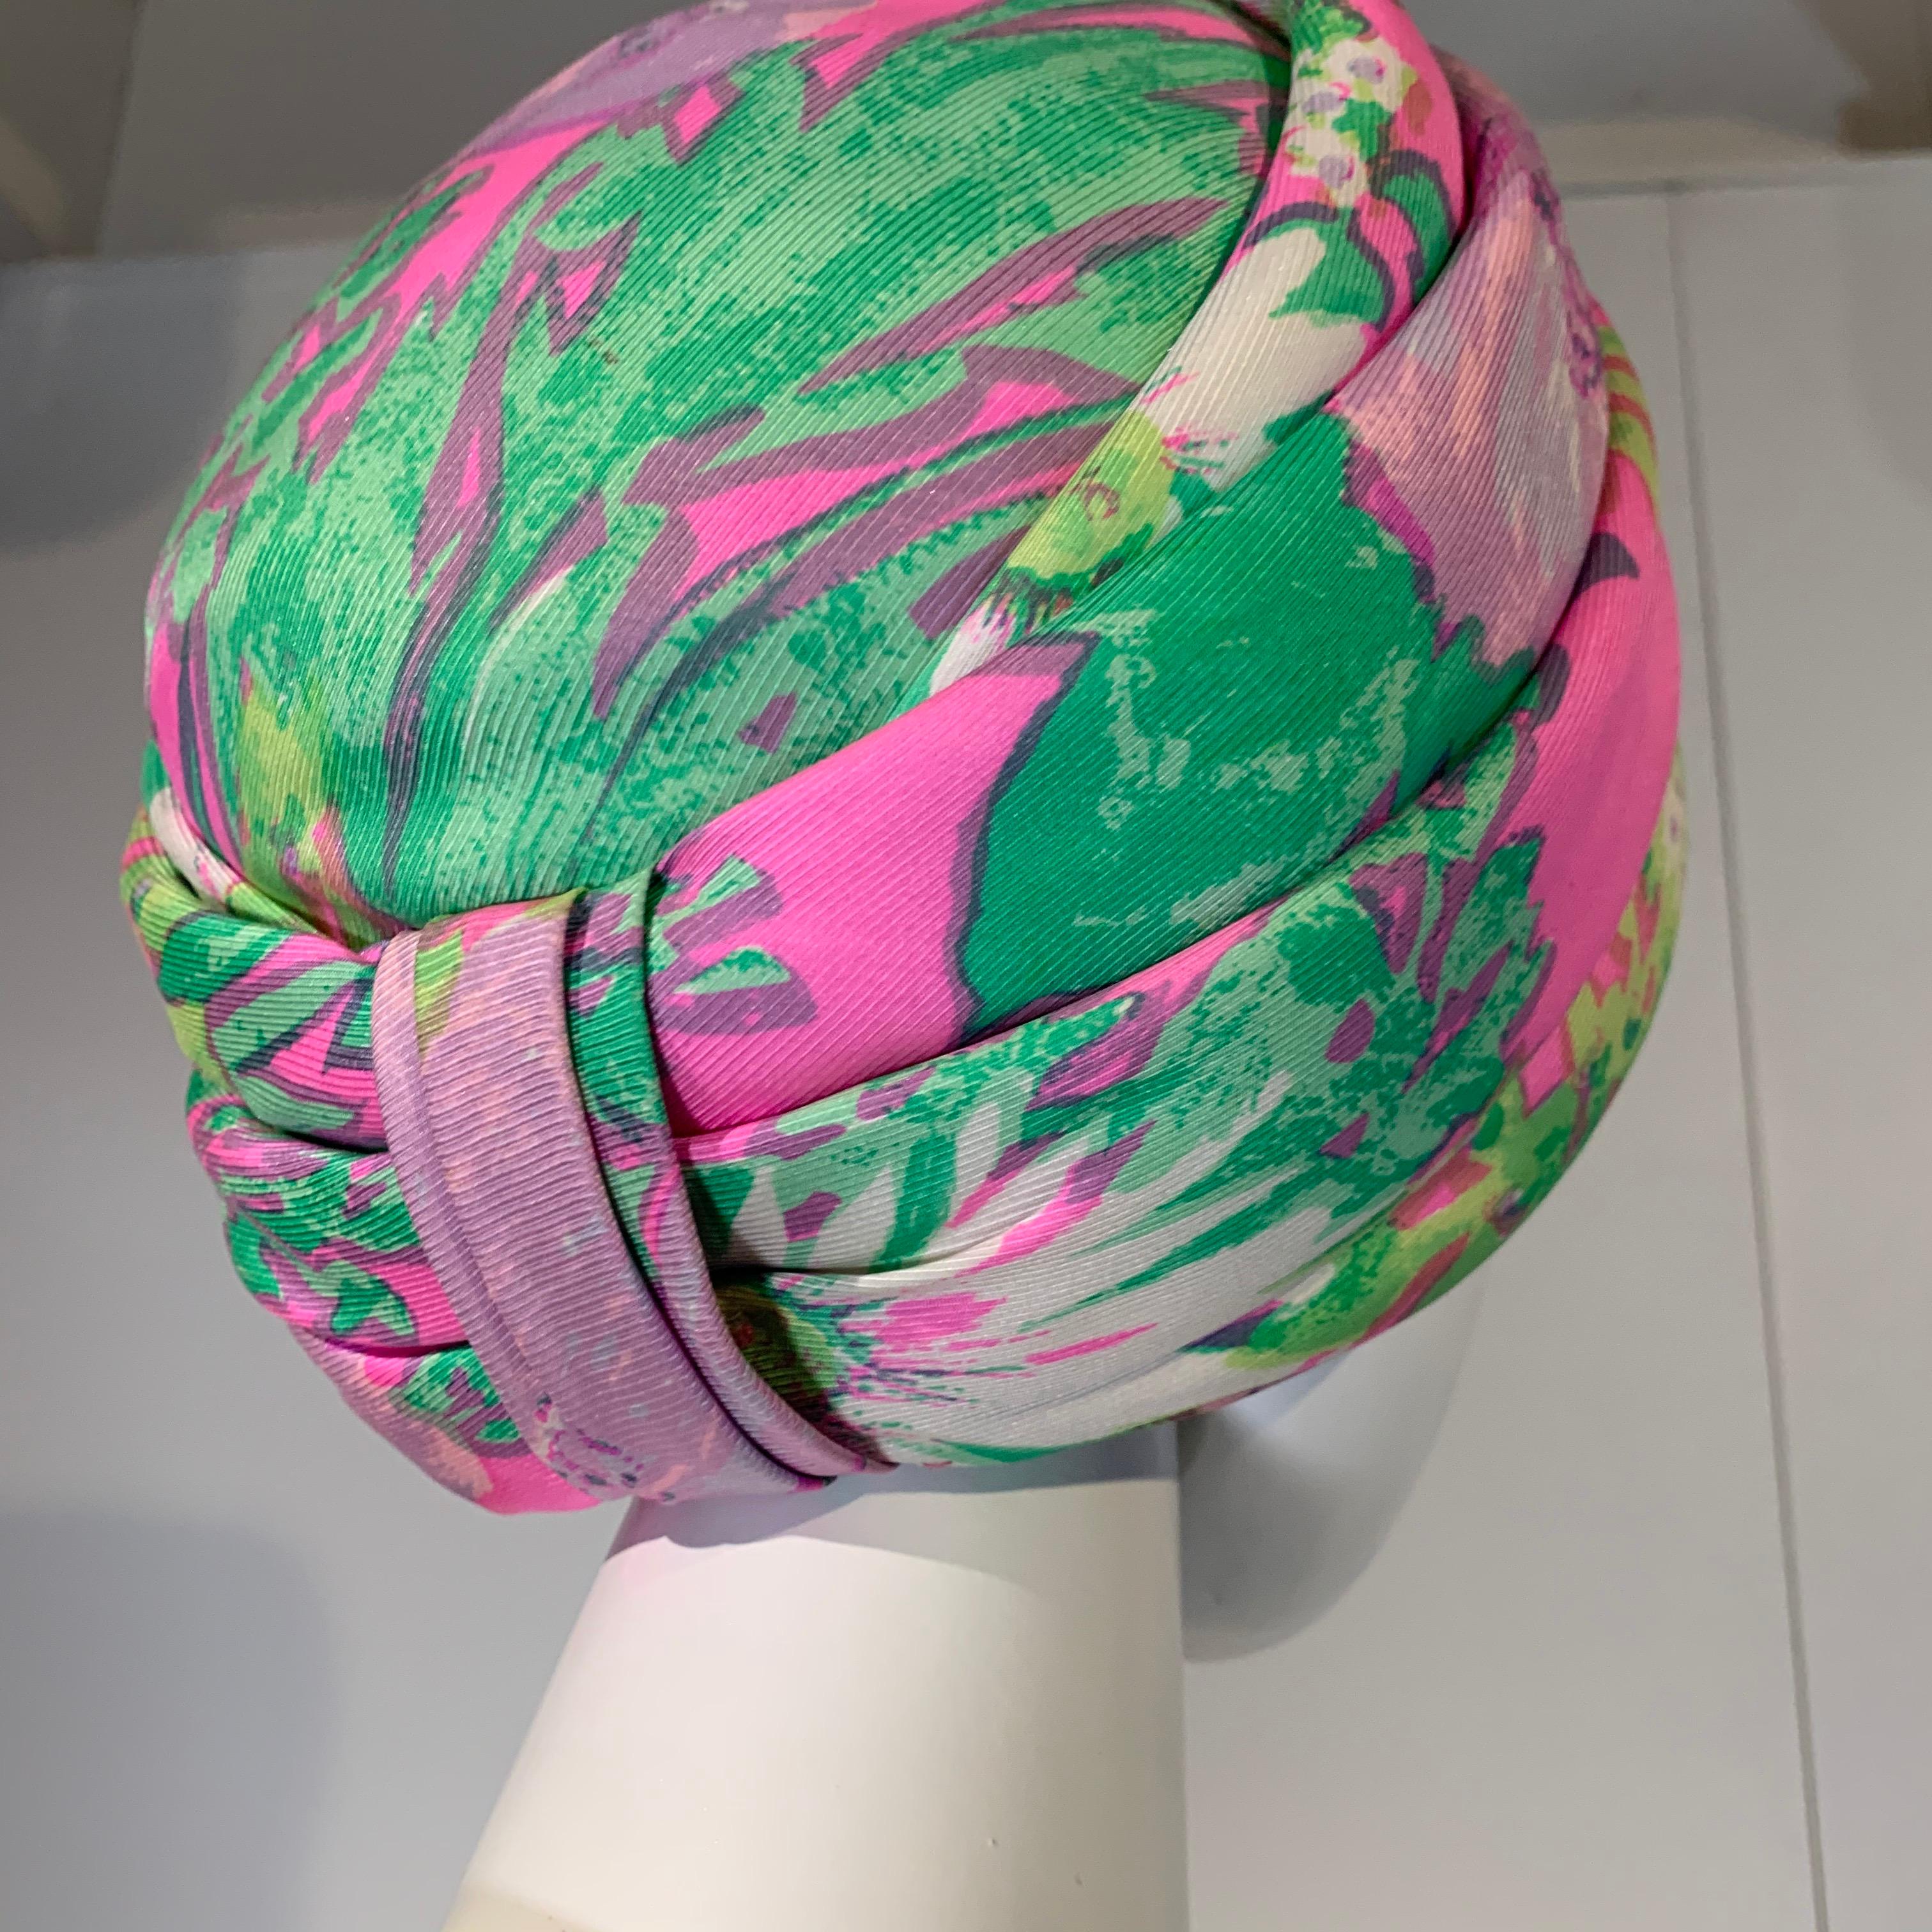 1960 Irene Of New York Fluorescent Floral Print Tufted Turban & Foulard Size M In Excellent Condition For Sale In Gresham, OR